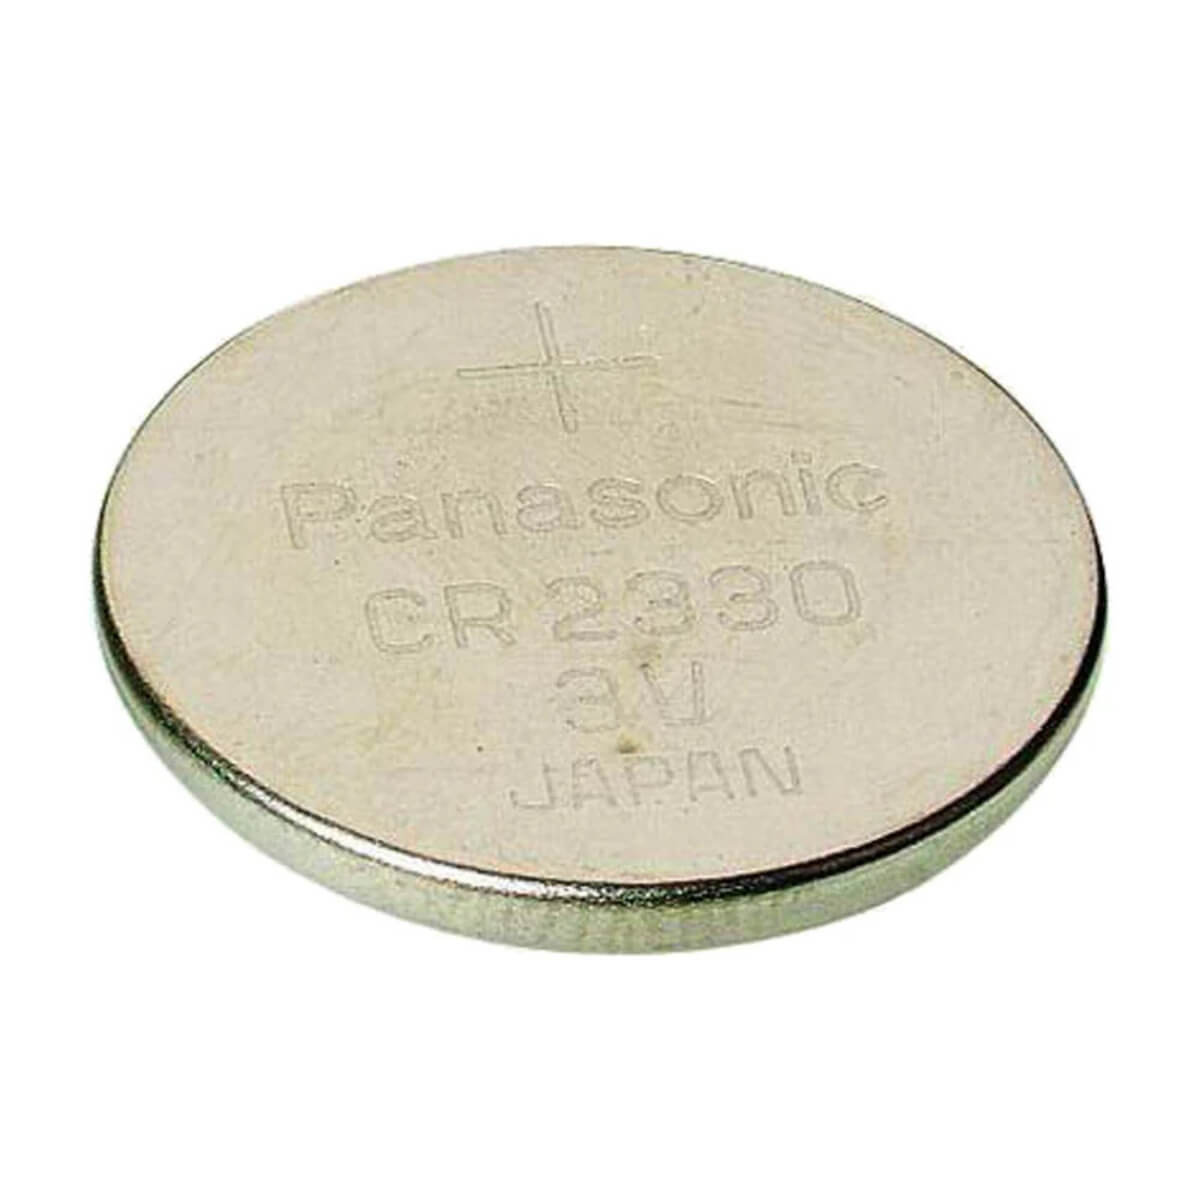 Cr2330 3 Volt Lithium Battery Replacement Battery By Use Panasonic   